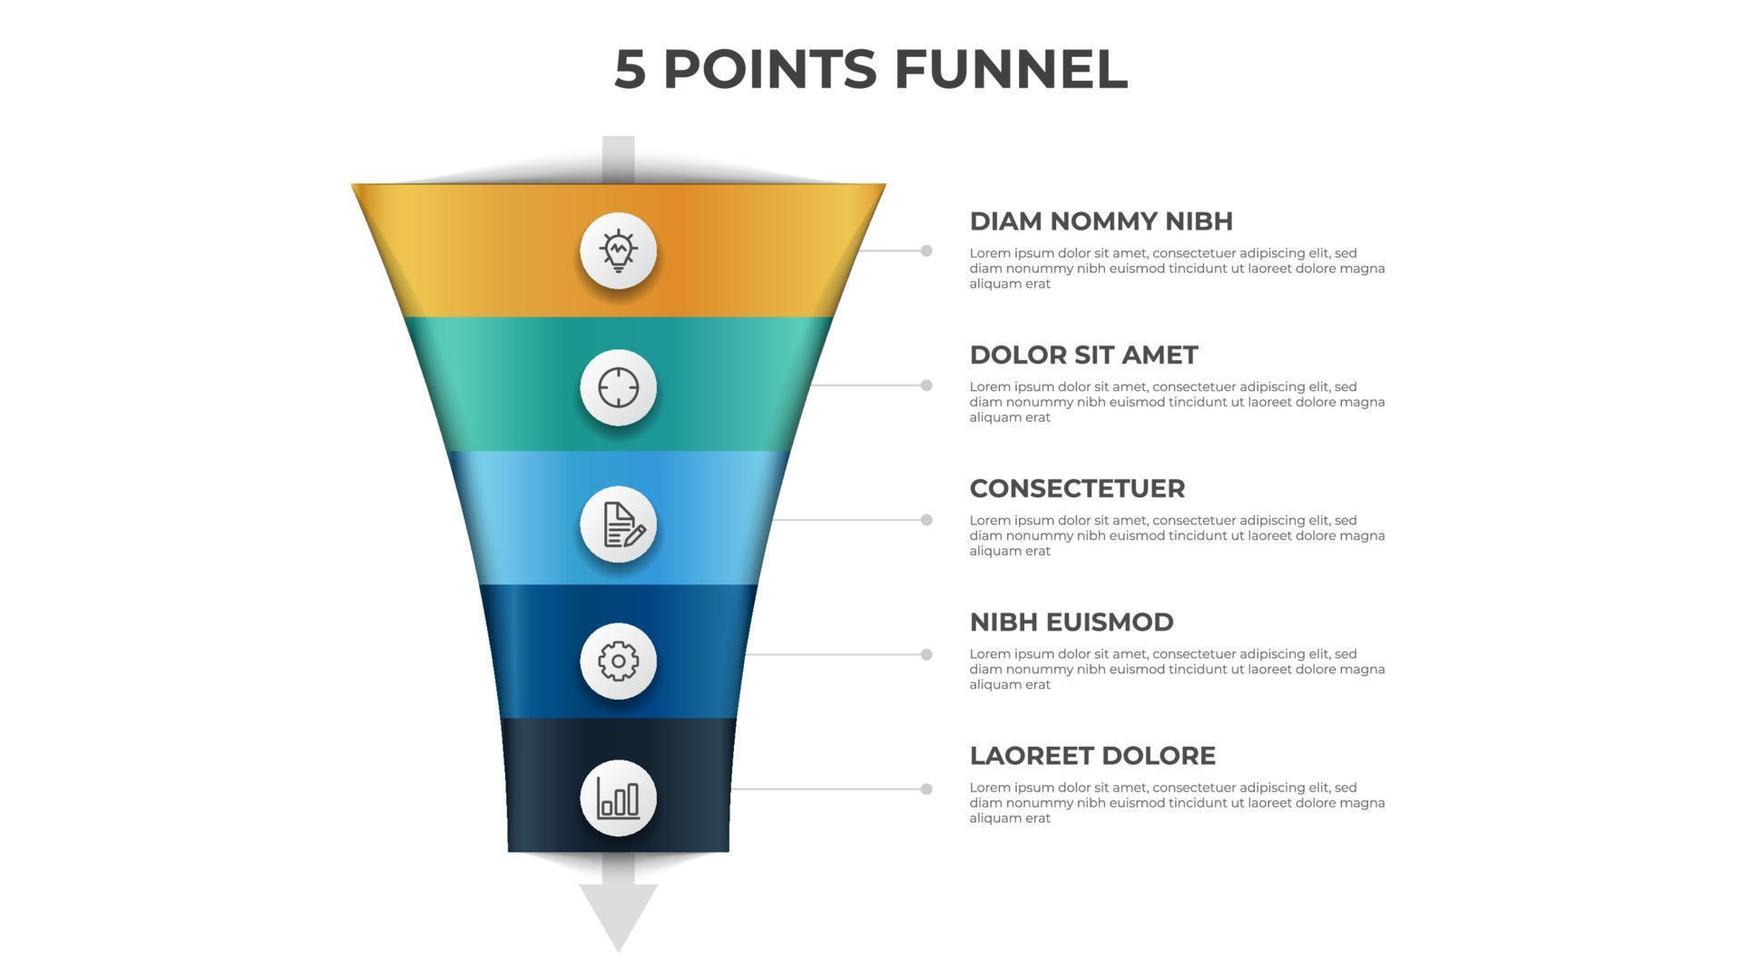 funnel arrow diagram with 5 points, options, list, infographic element template vector, can be used for sales, marketing, process flow vector